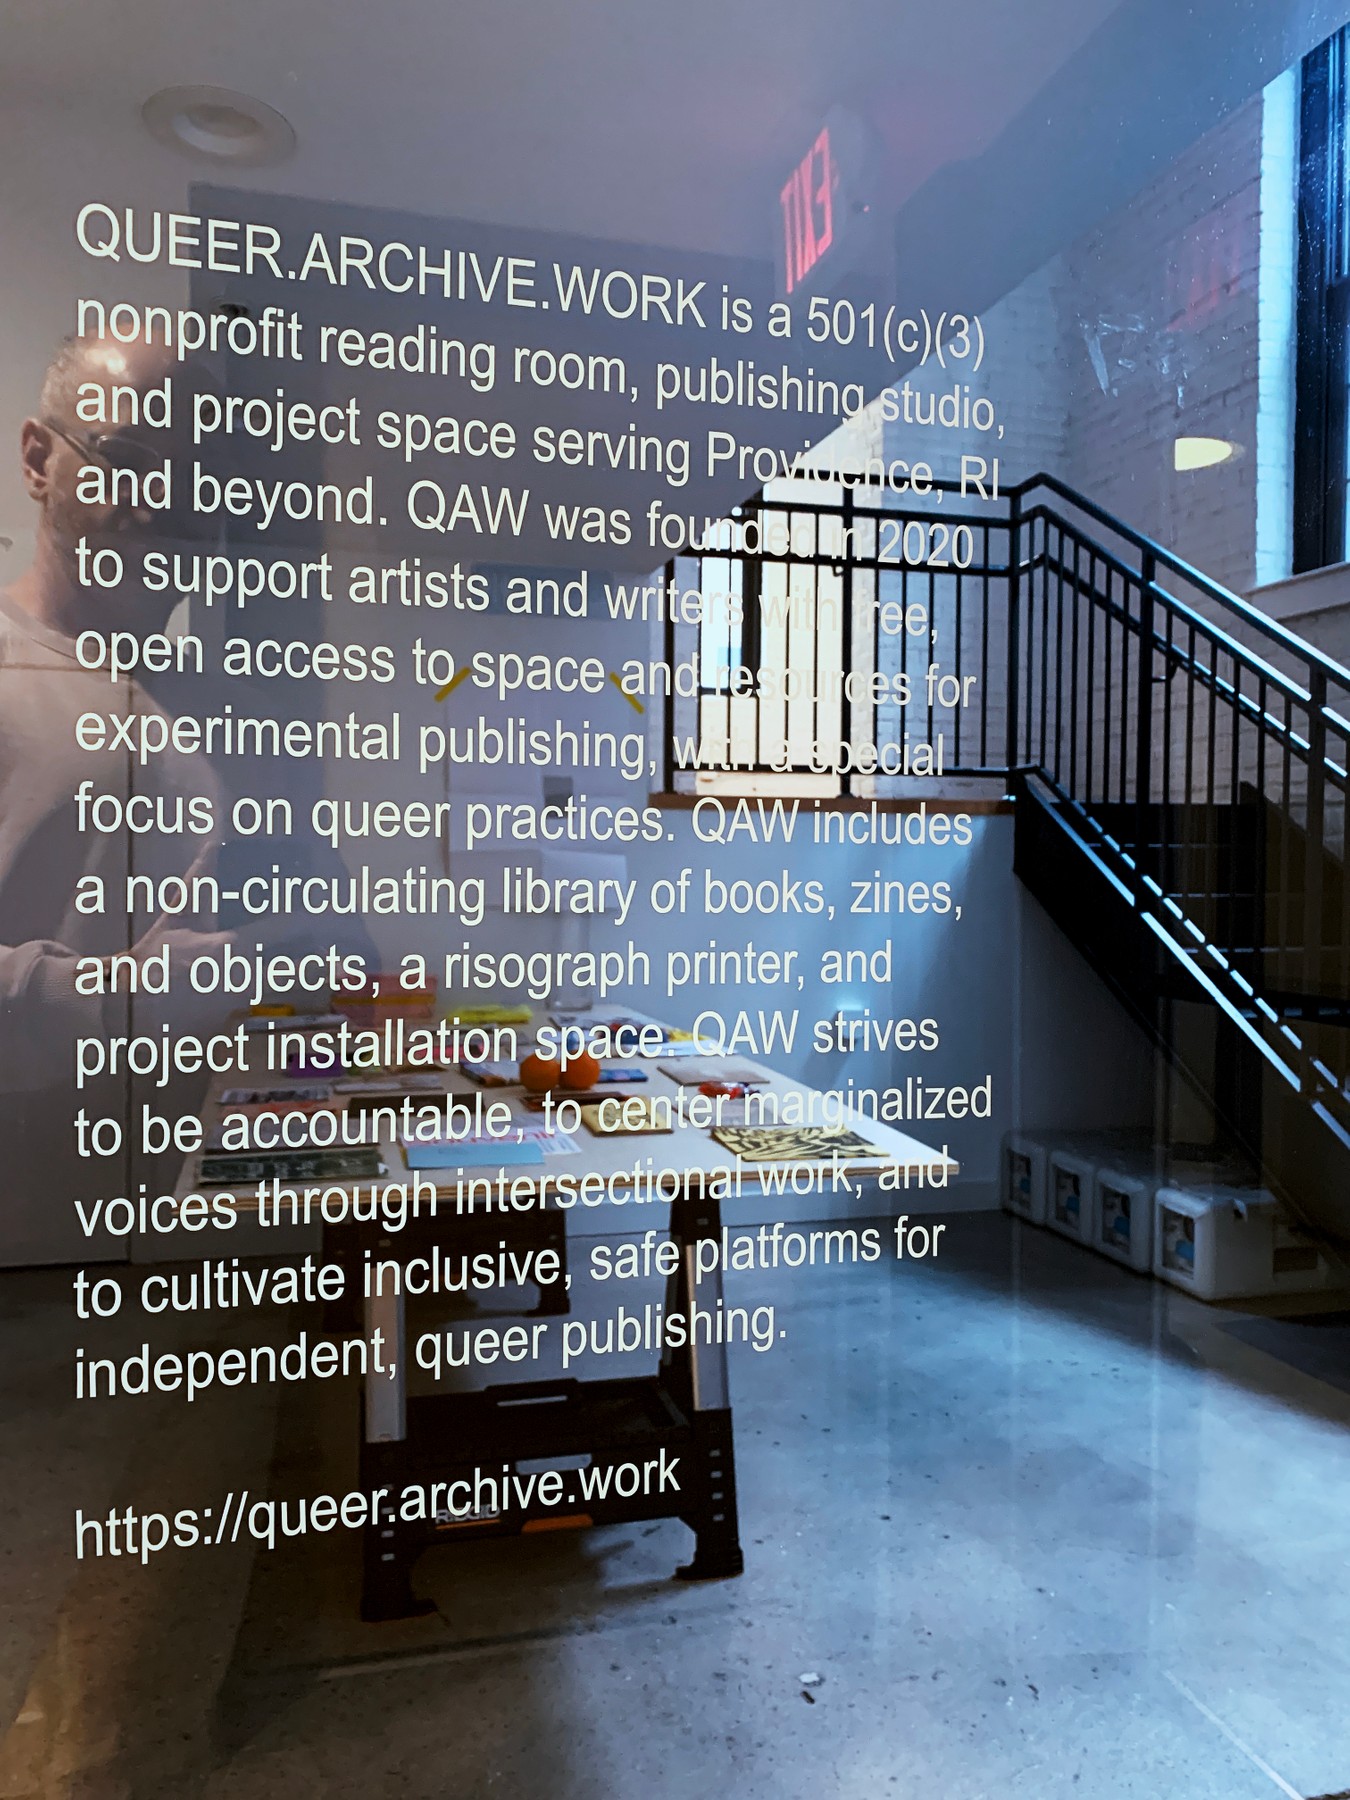 QUEER.ARCHIVE.WORK new space